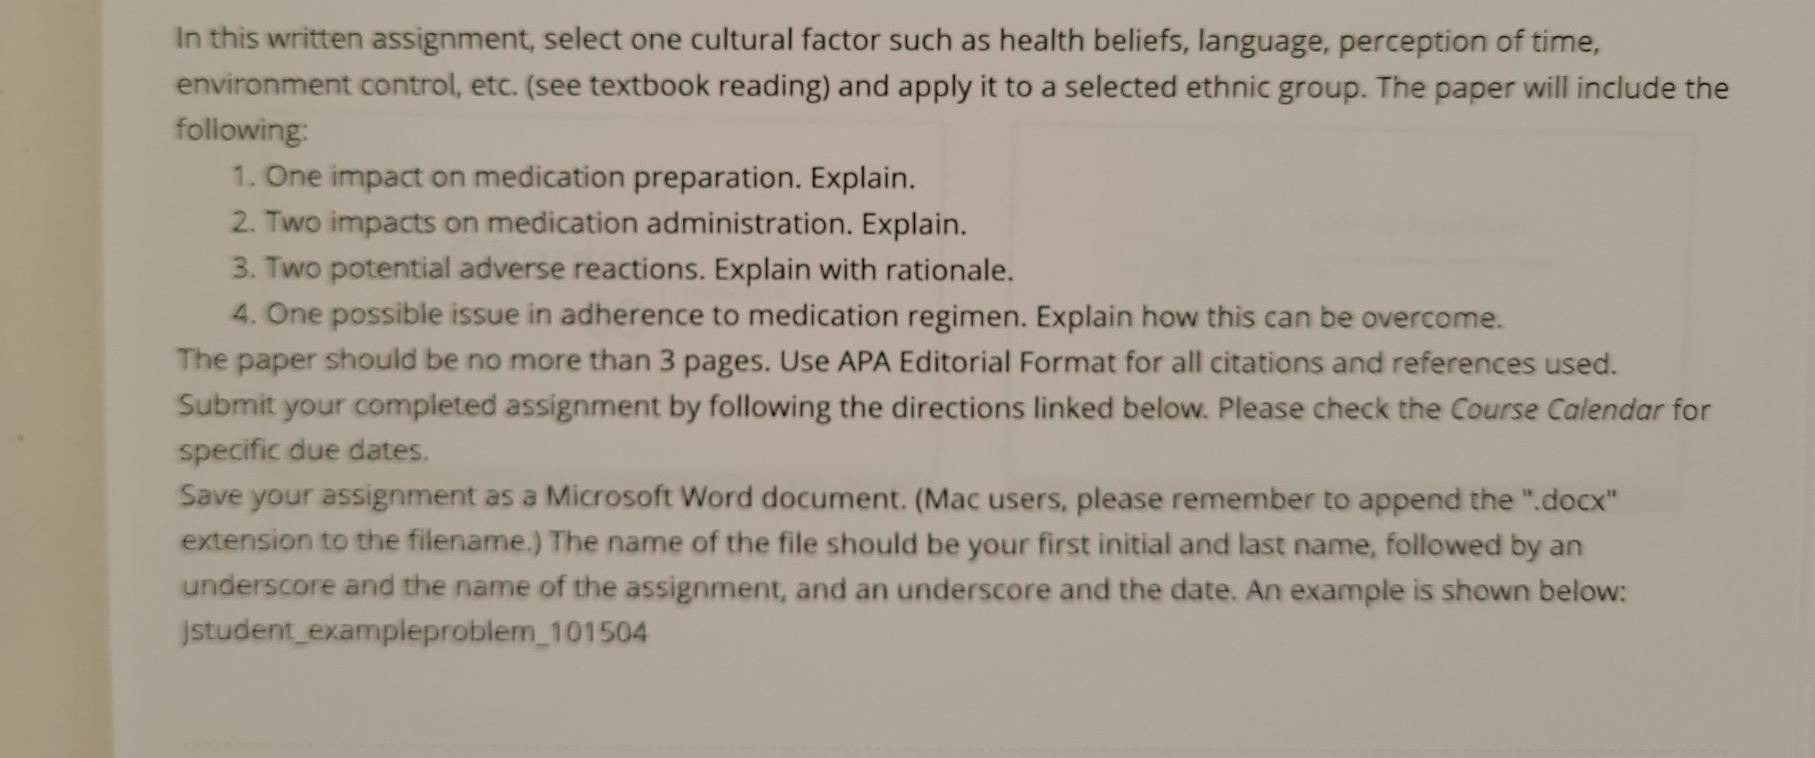 Module 09 Written Assignment Cultural Factors And Their Influence On Medications Module 09 Content In This Written Ass 2